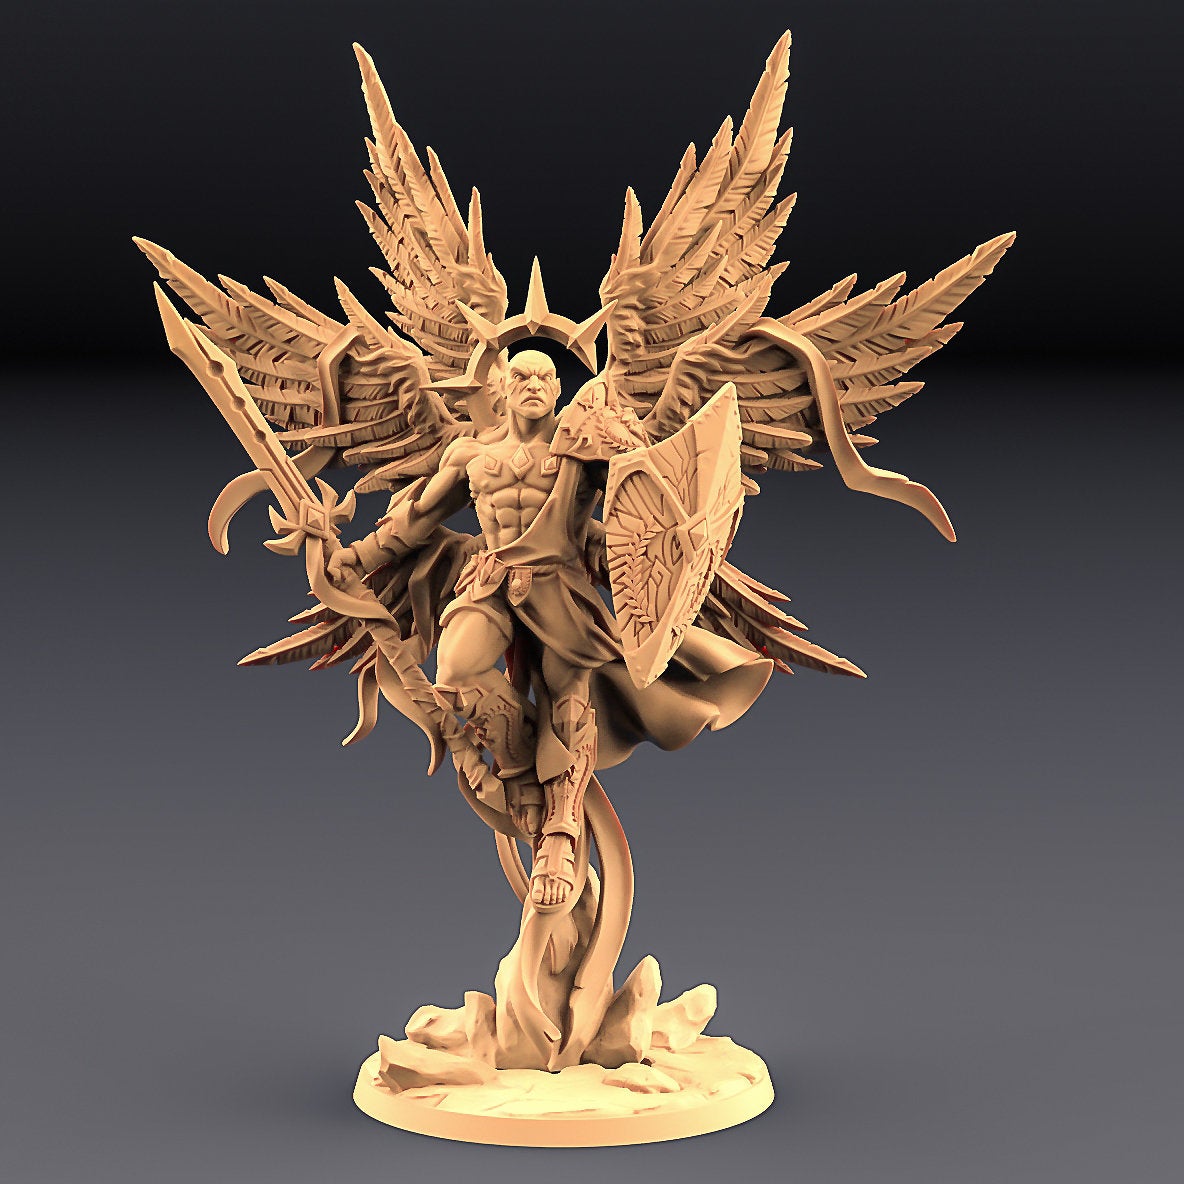 Sol the Holiest Epic Boss kit from Artisan guild for Dungeons and Dragons, Pathfinder or any RPG